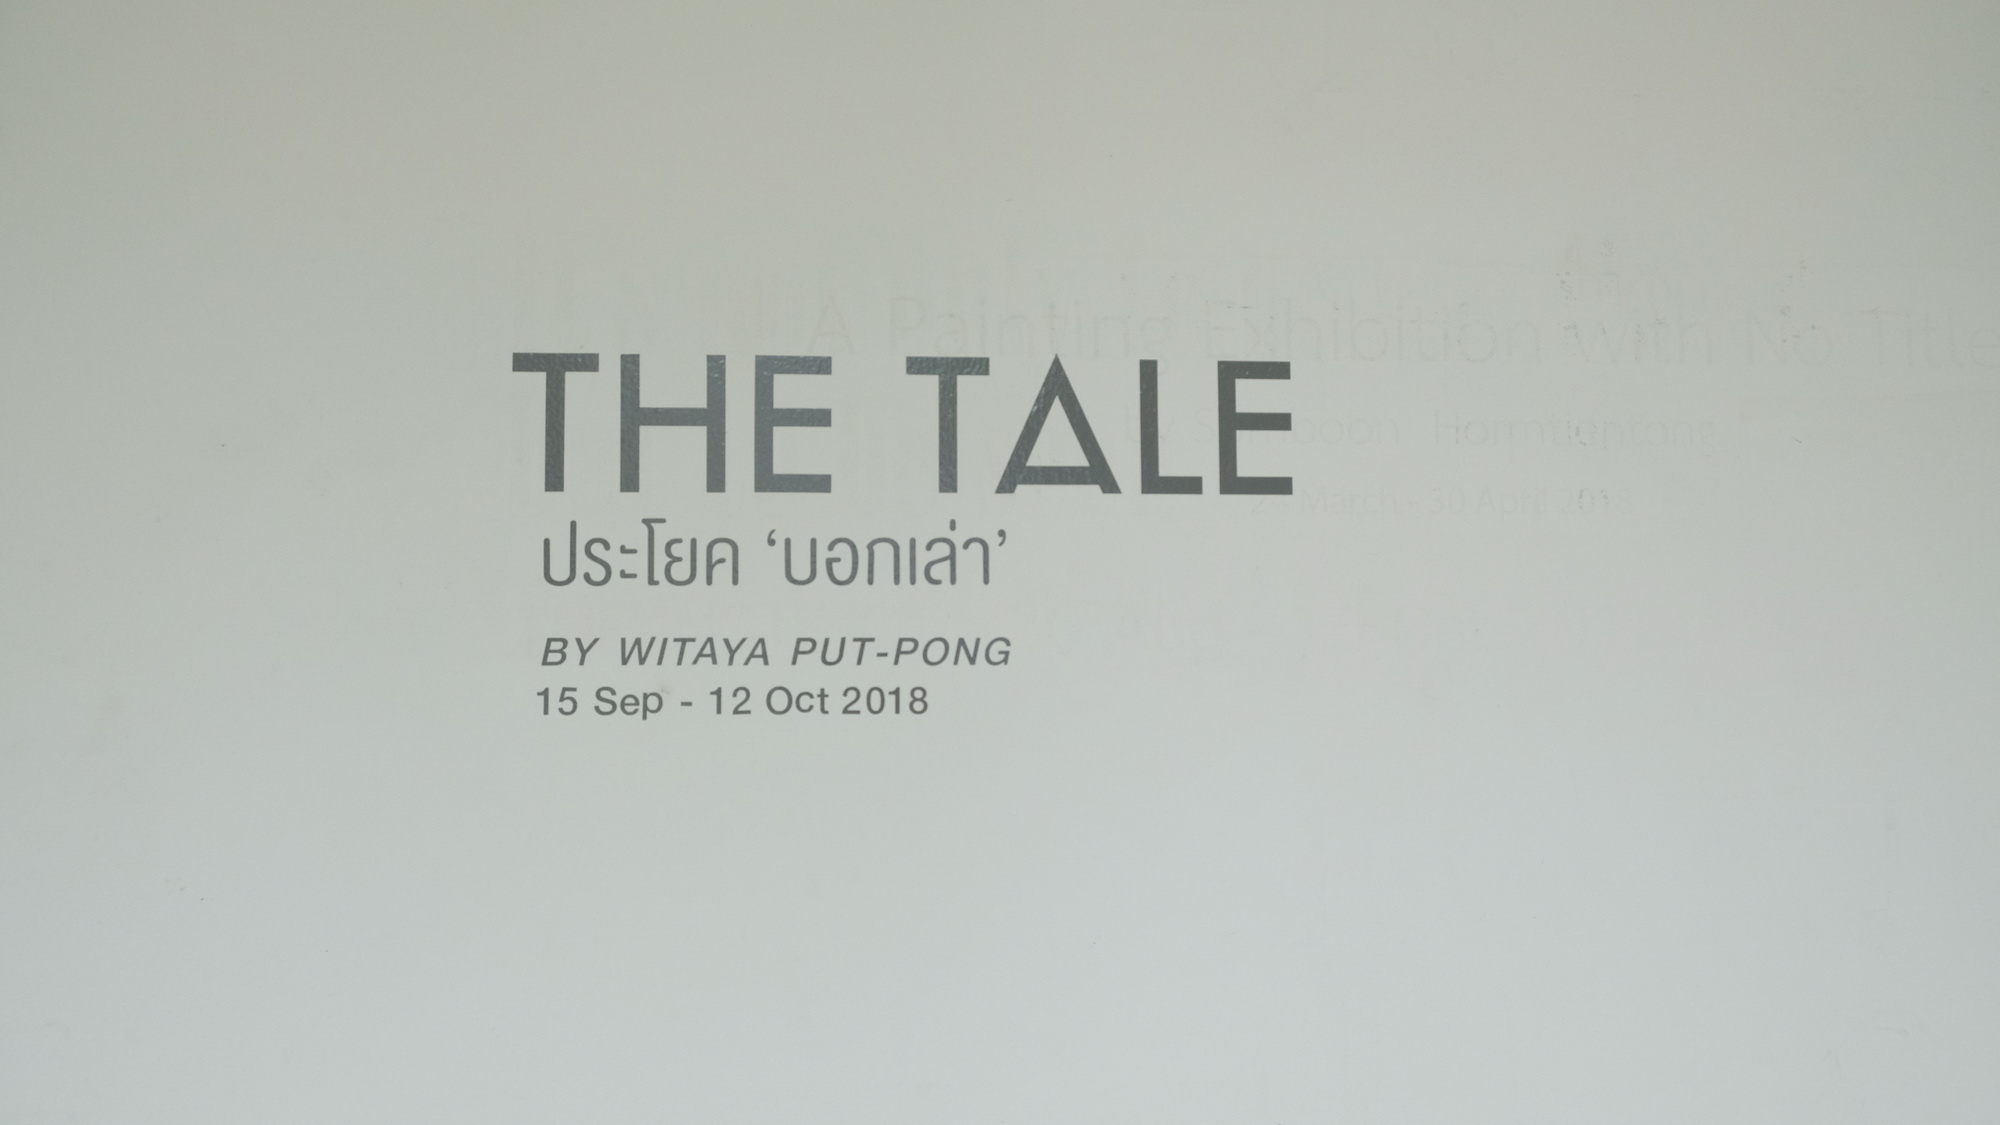 The Tale | Witaya Put-pong